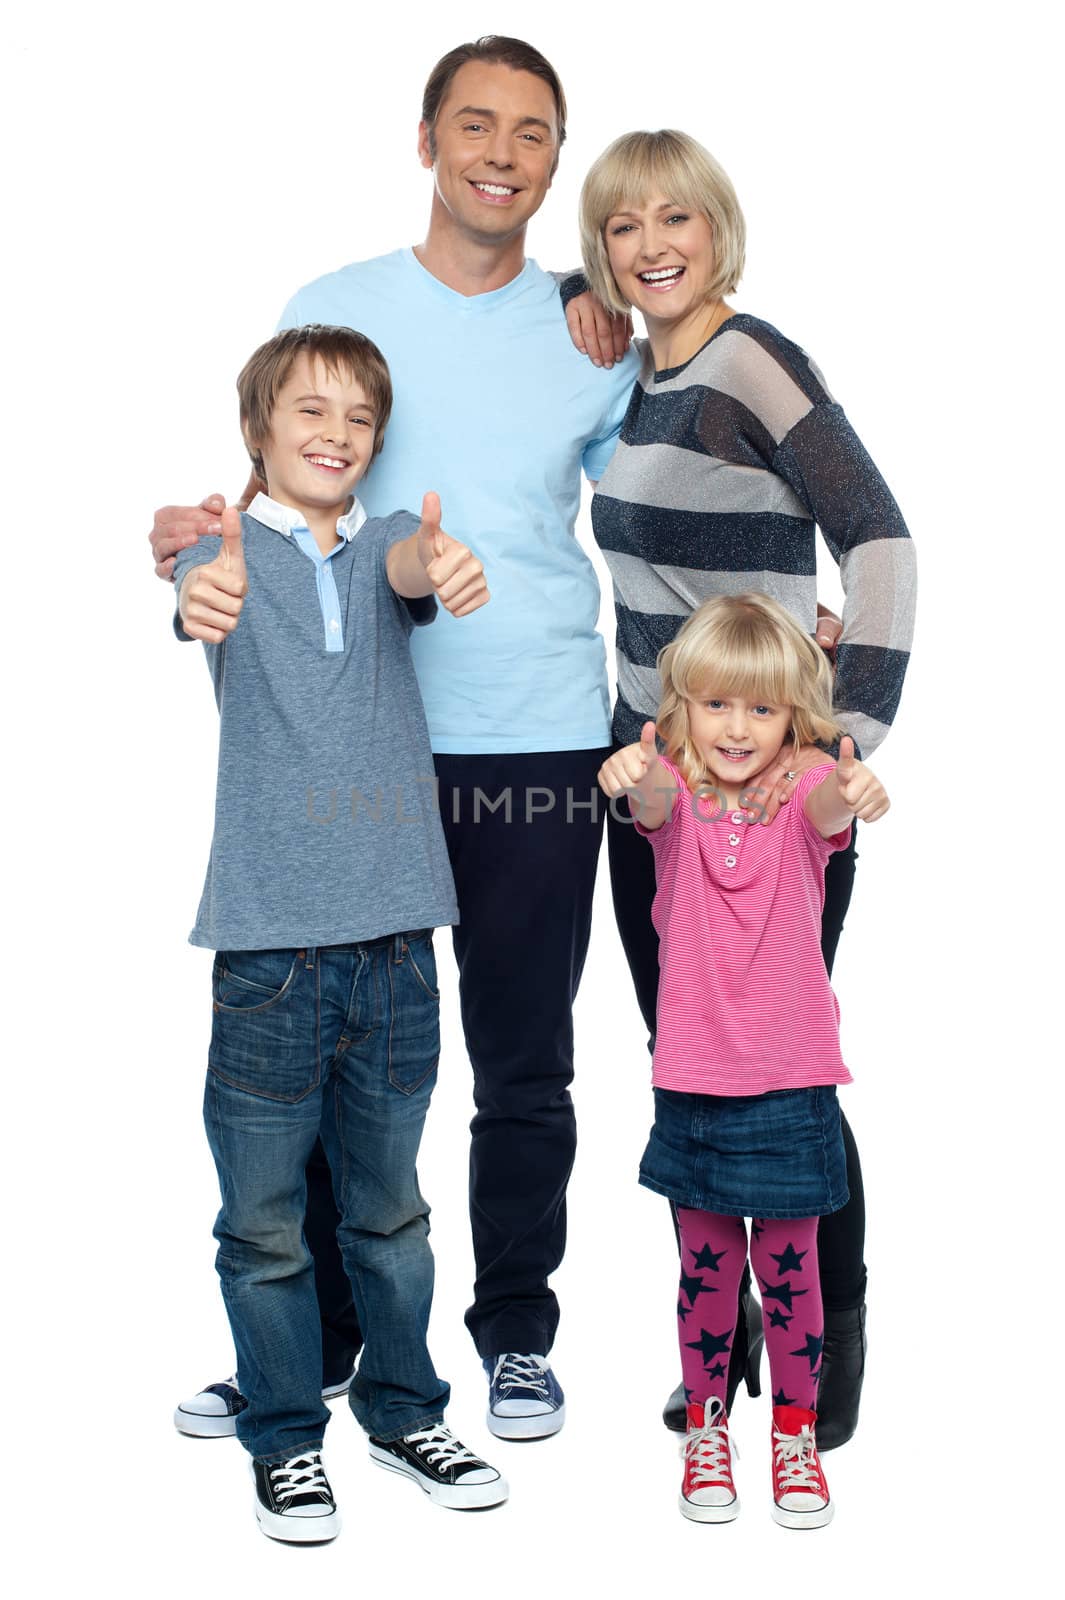 Snapshot of a successful family gesturing thumbs up by stockyimages